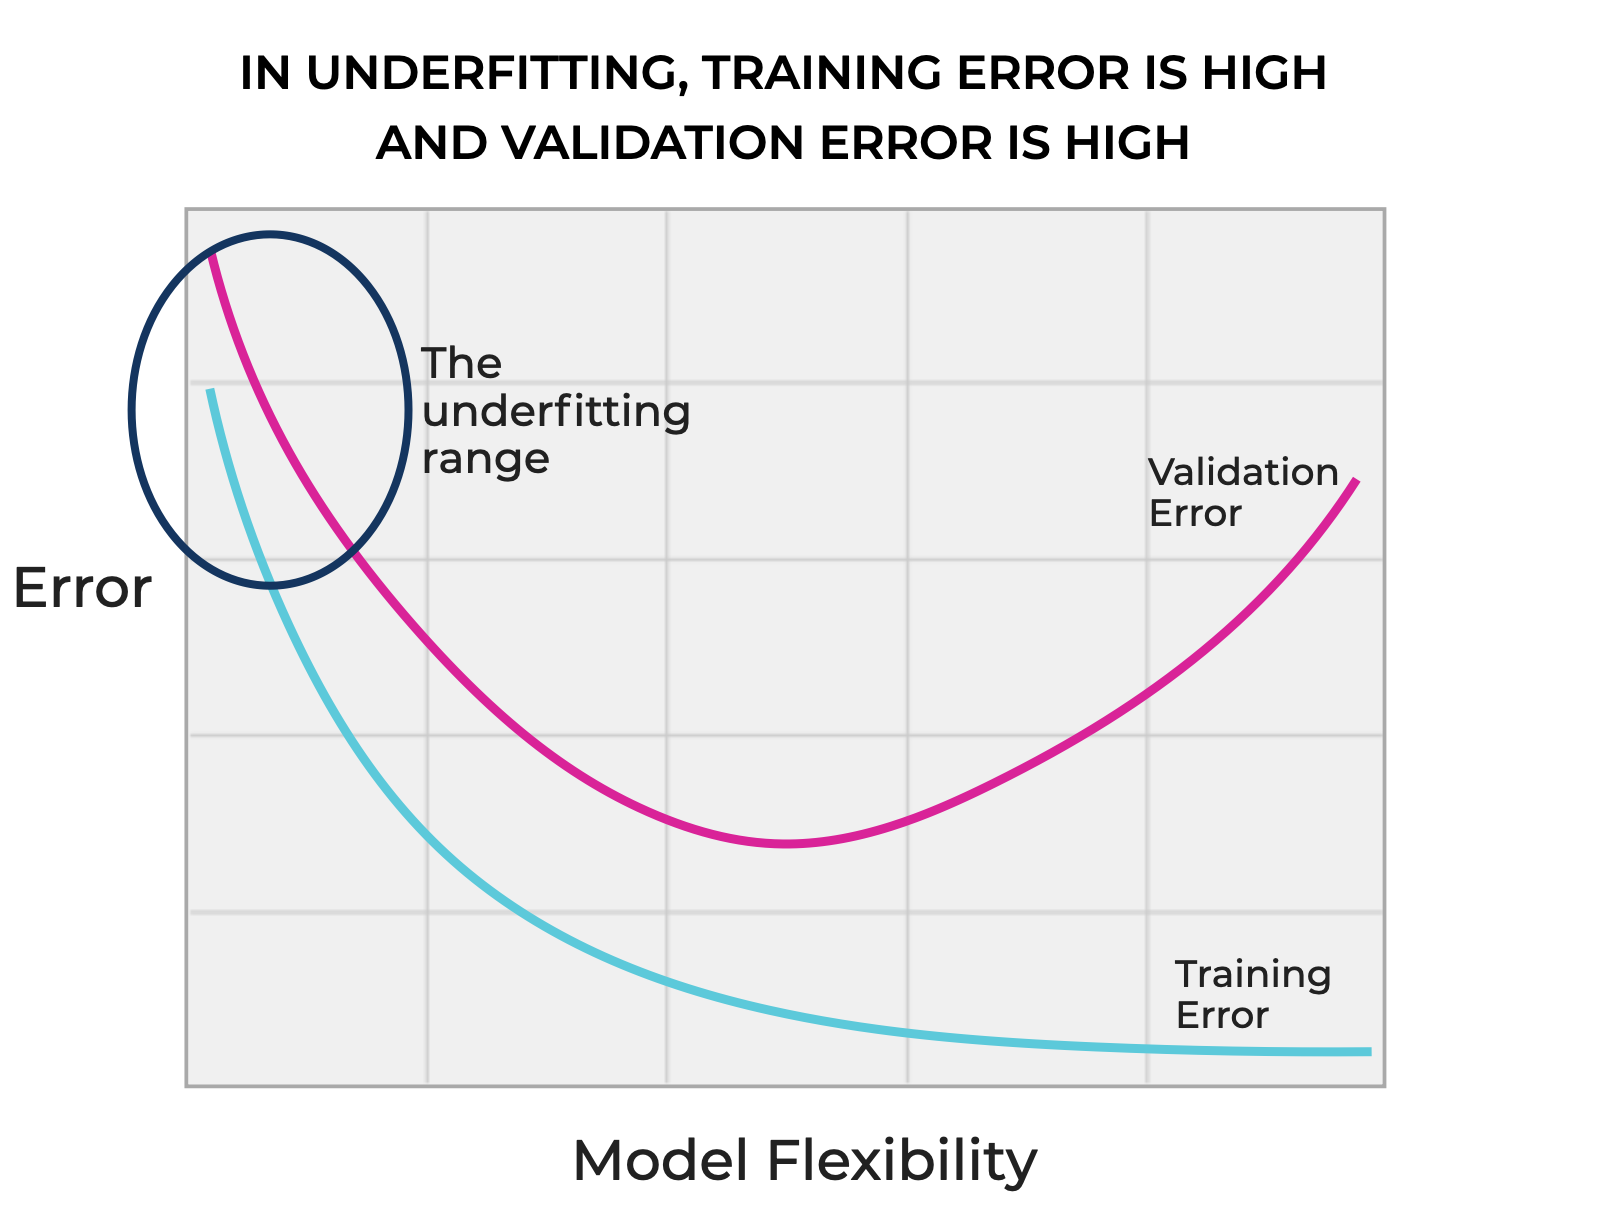 An image that shows the underfitting range, in the context of how model flexibility relates to training and validation error.